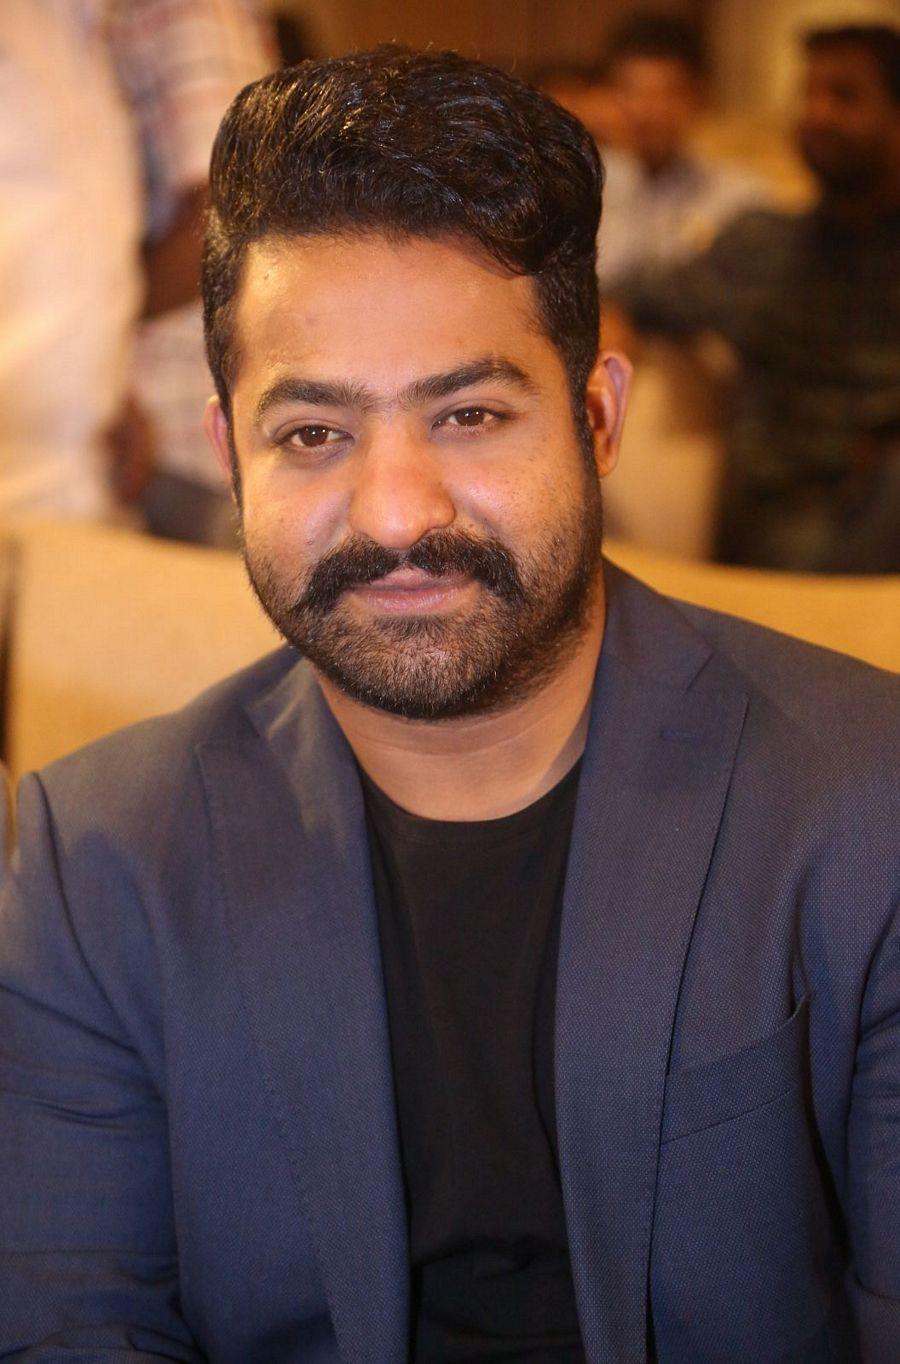 Jr. NTR - South Indian Actor | New movie images, New images hd, New photos  hd